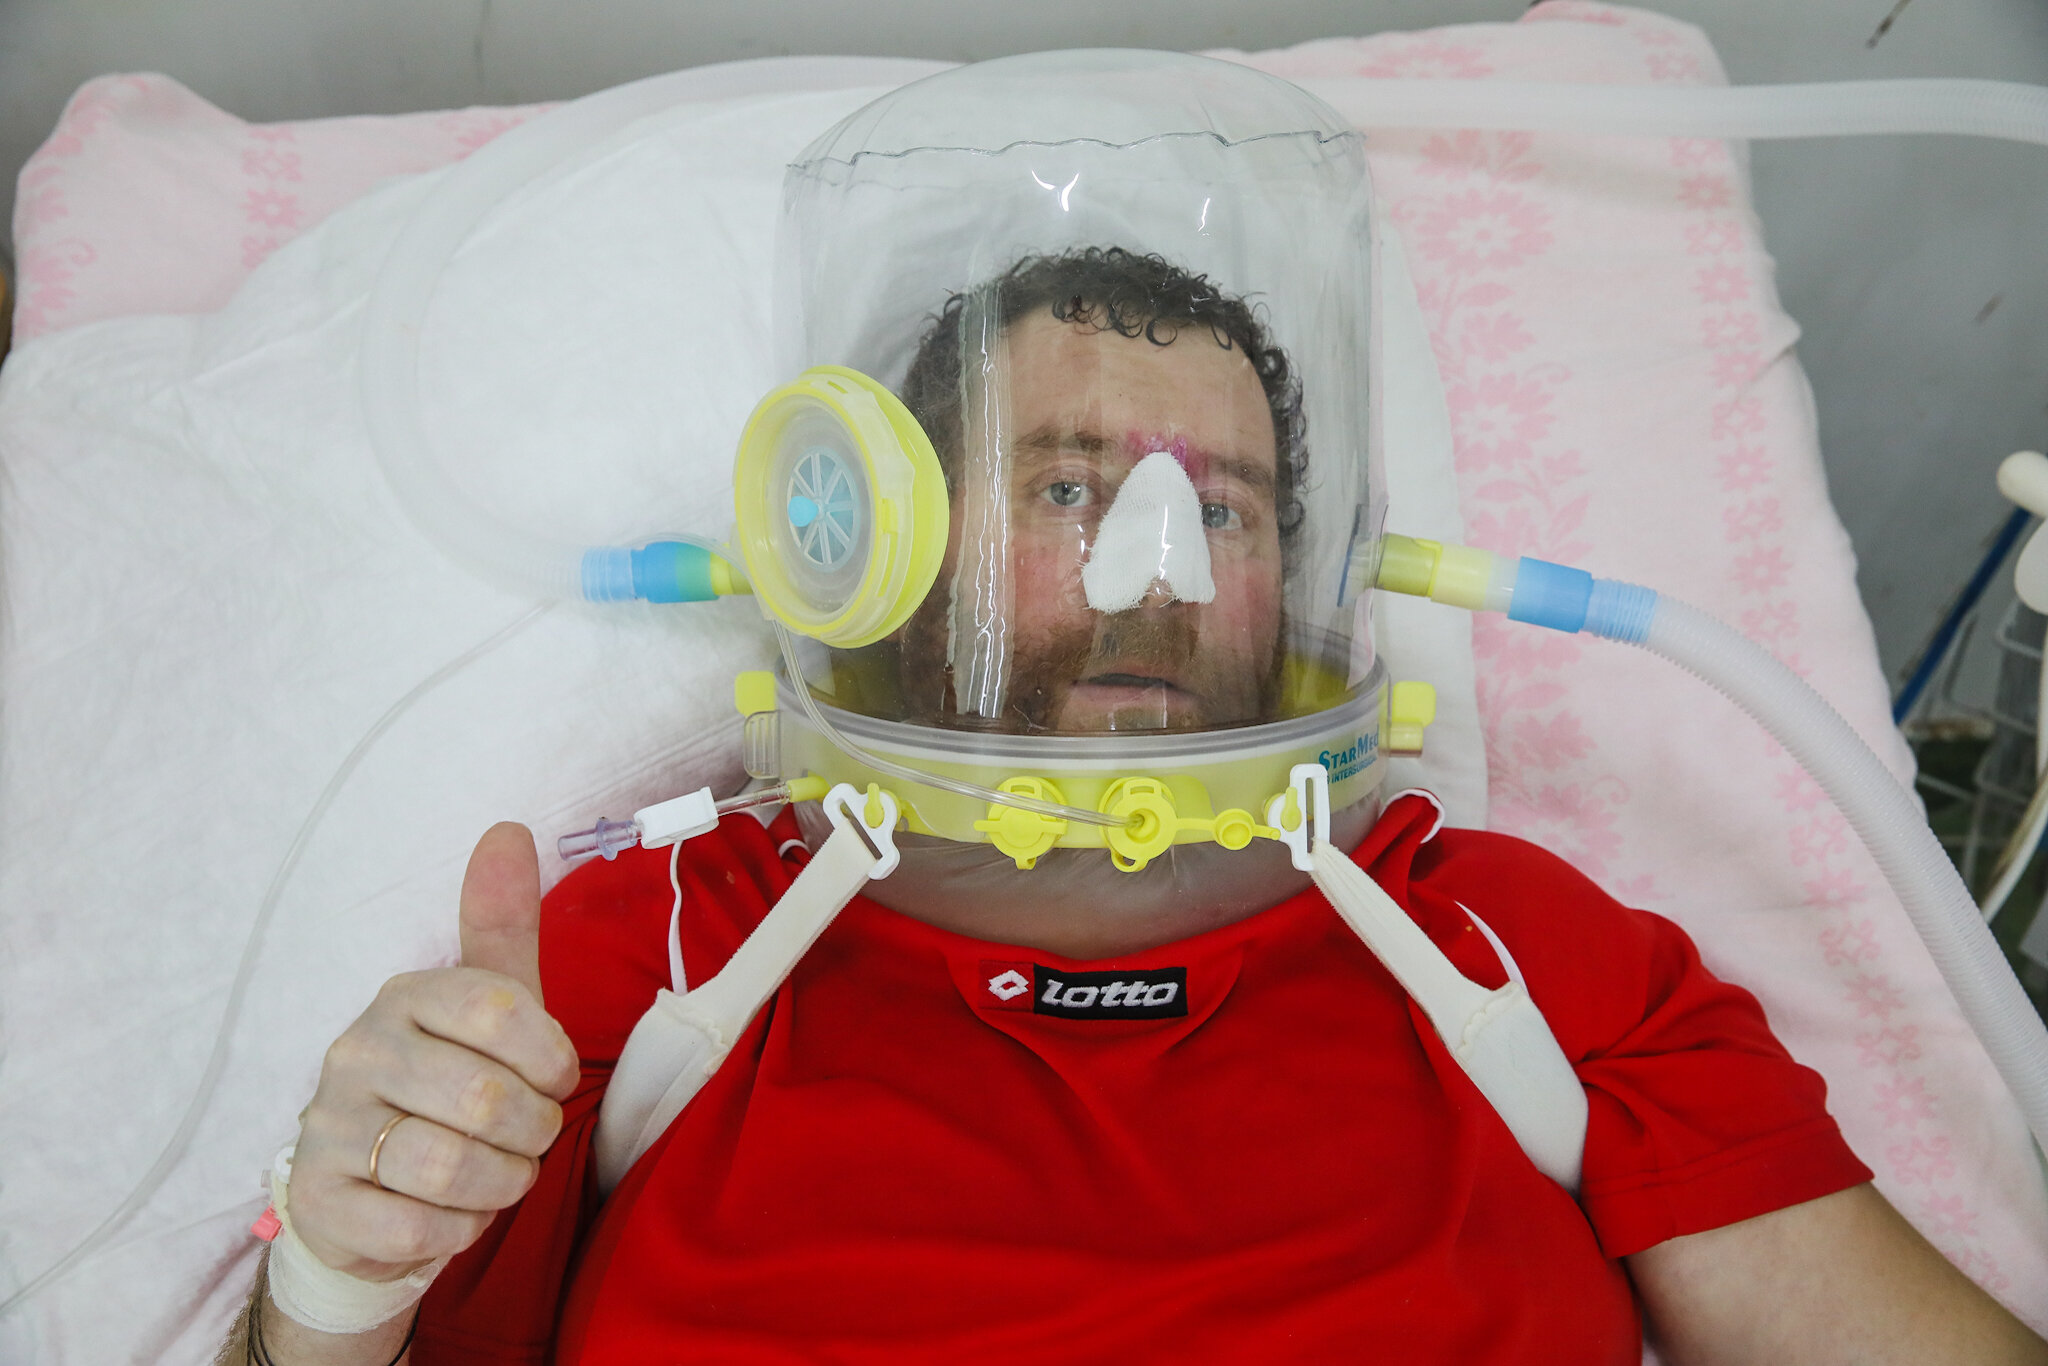 COVID-19 patient Vasyl wears a helmet supplying him with oxygen-enriched air at Kolomyia District Hospital in Ivano-Frankivsk Oblast on March 16, 2021.